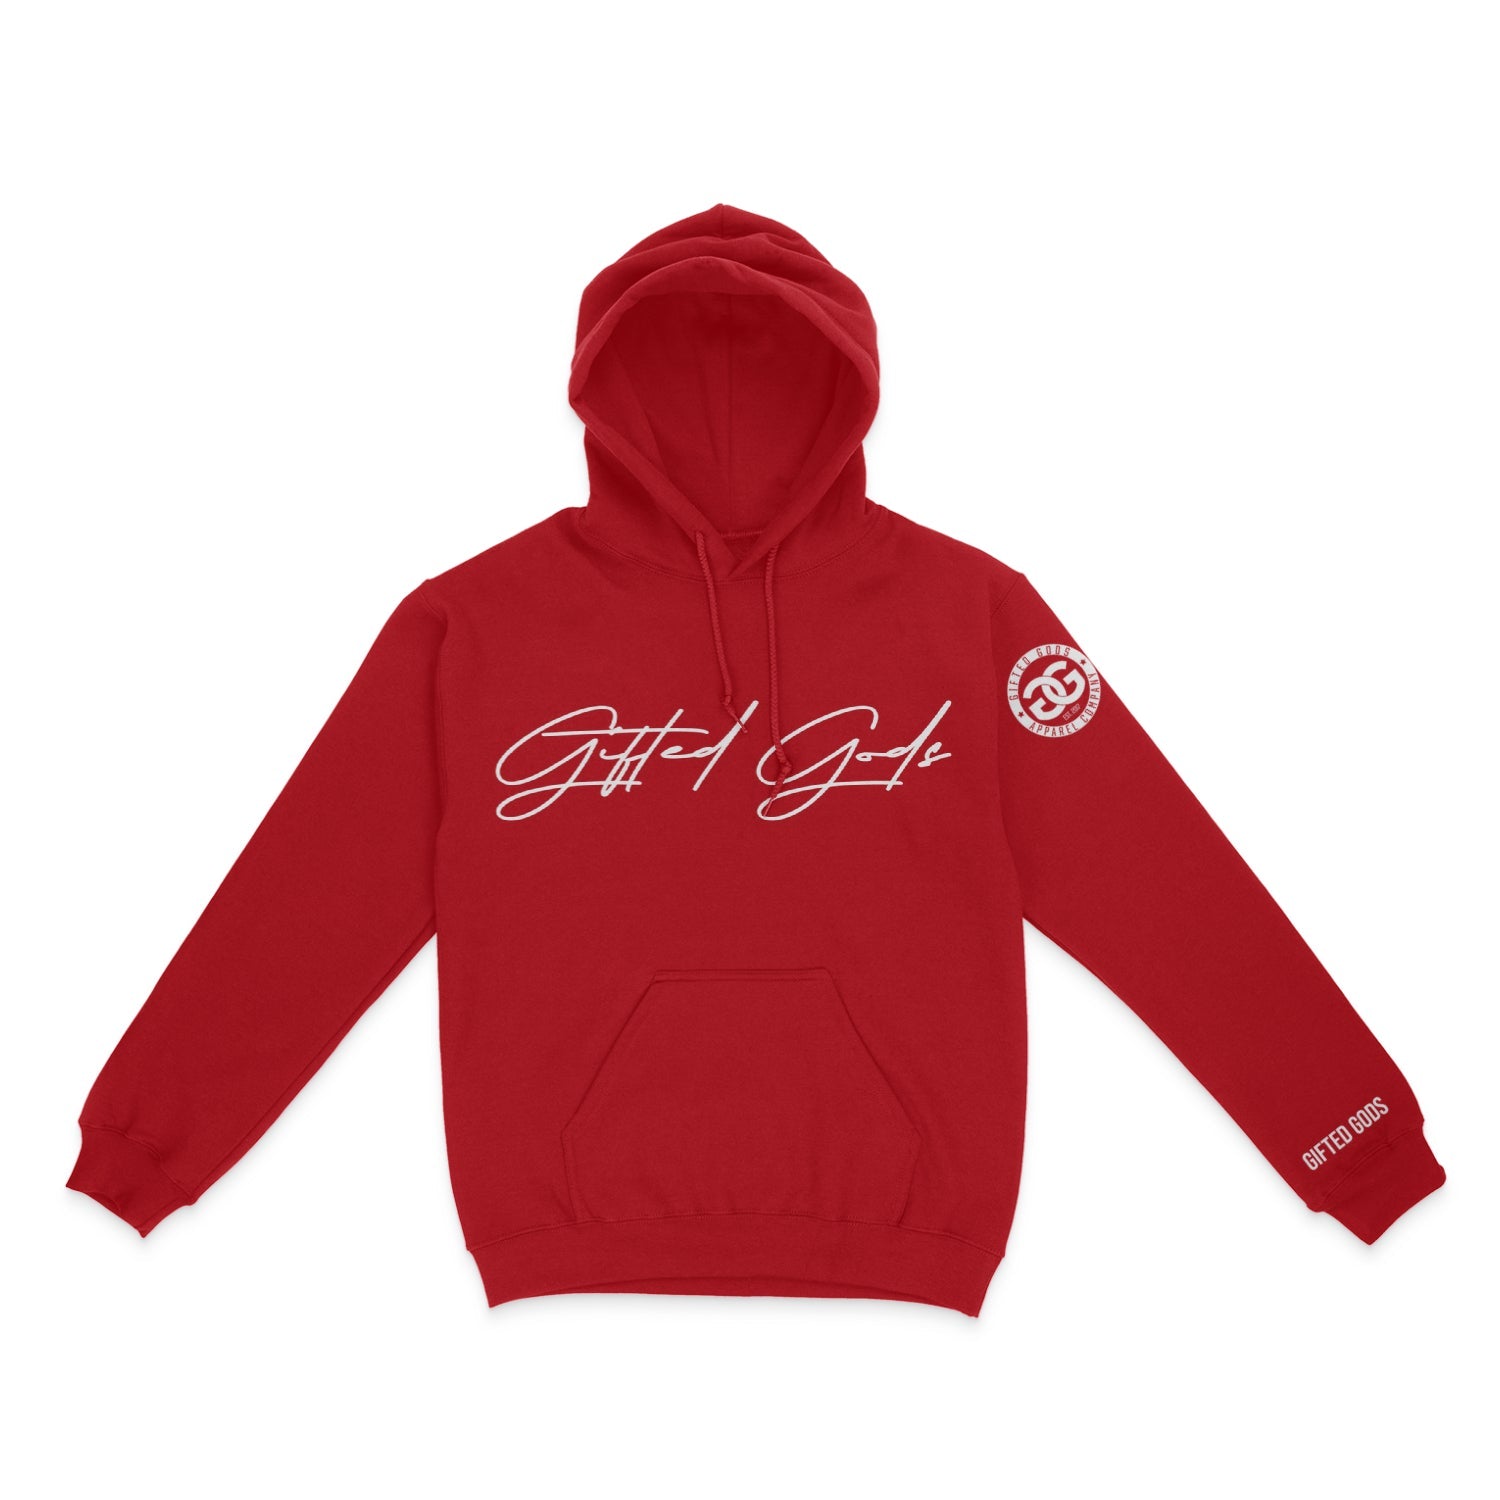 Gifted Gods Trademark Hoodie-Red/White